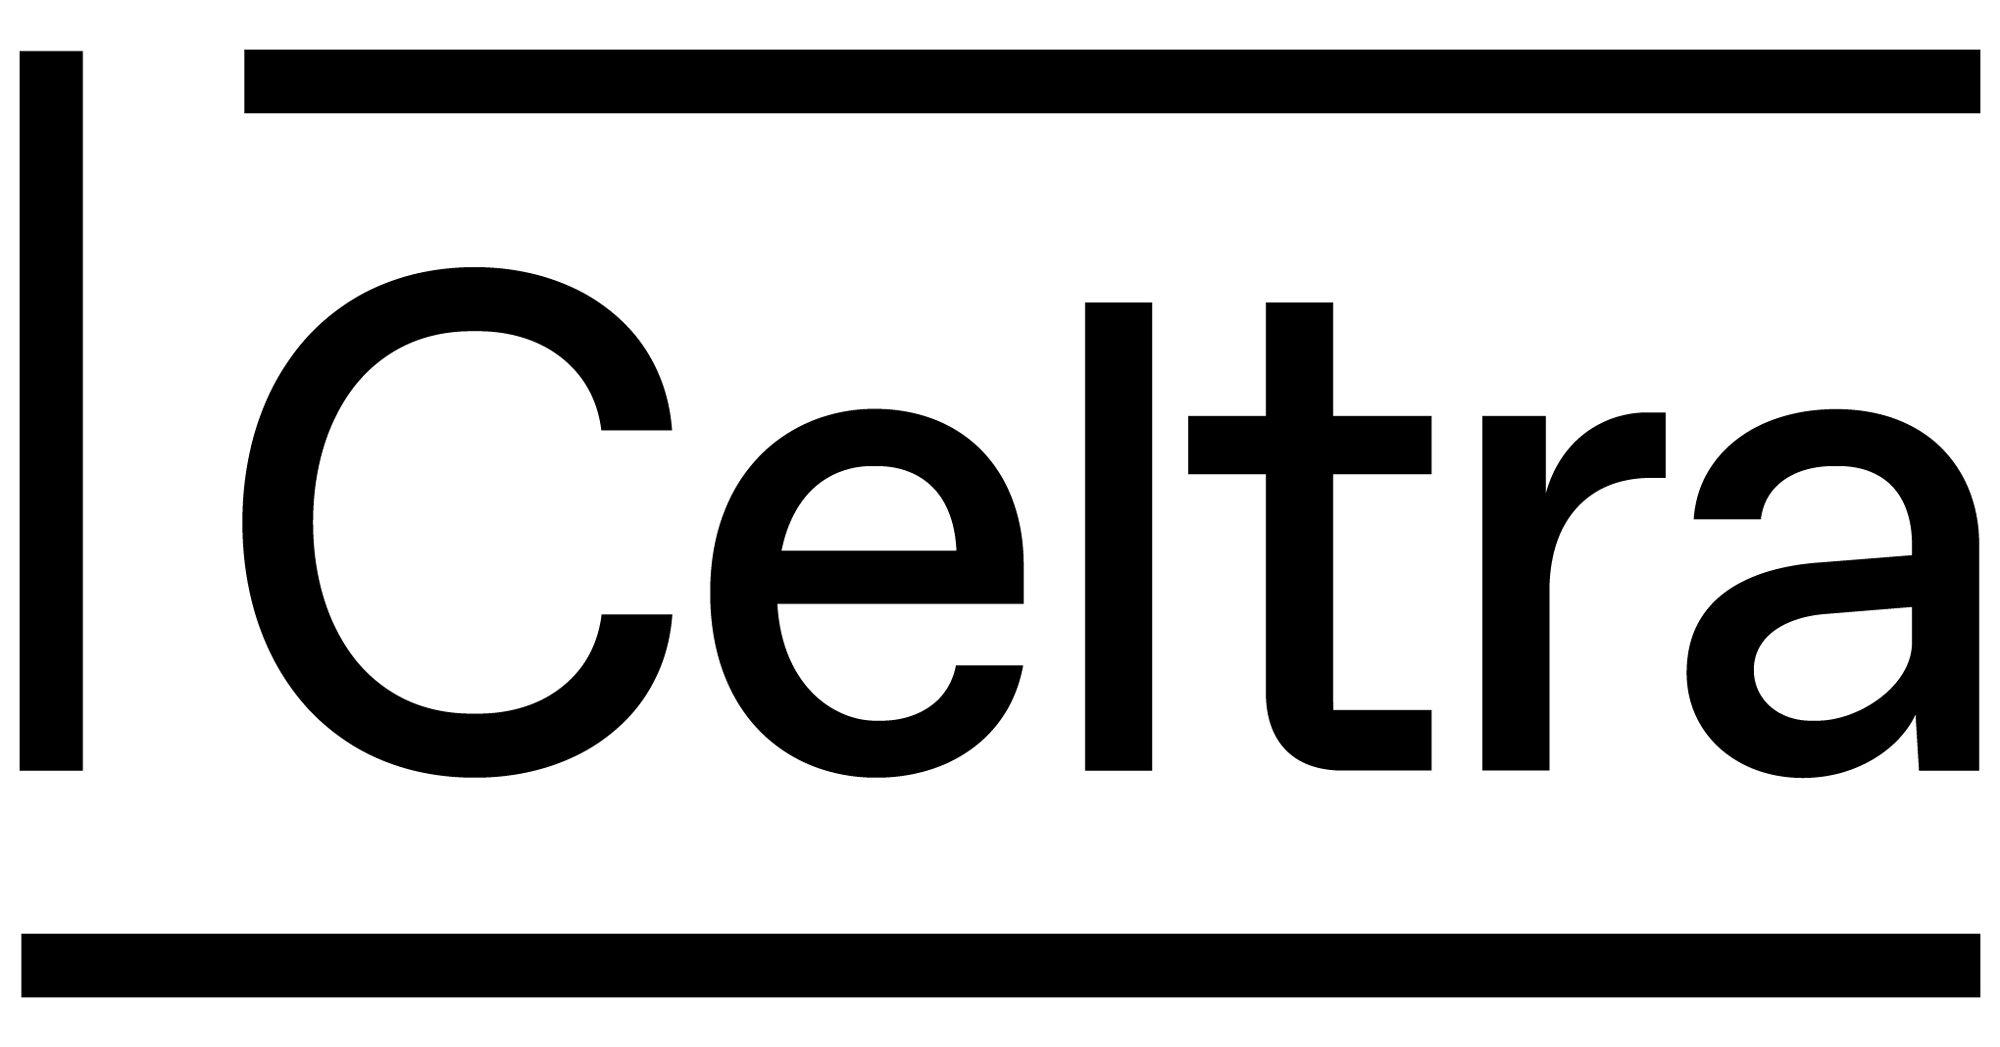 Celtra secures $15 million financing to lead creative transformation in digital advertising, providing Brands a Cloud-based Creative Operating System